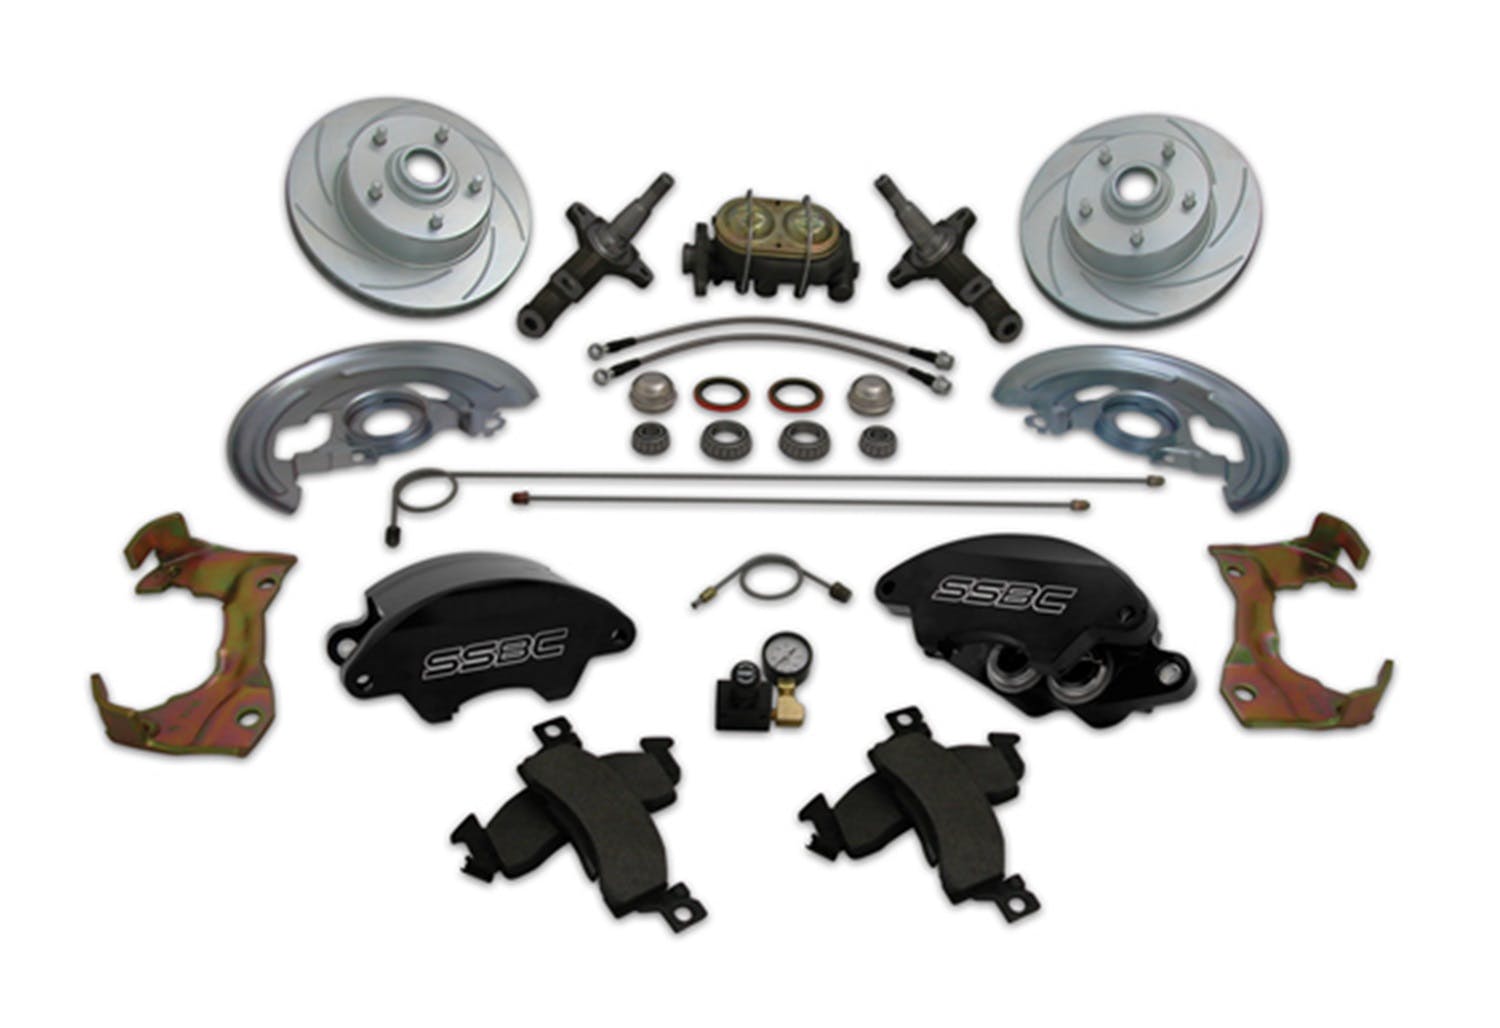 Stainless Steel Brakes A123-ABK Kit A123-A w/black calipers